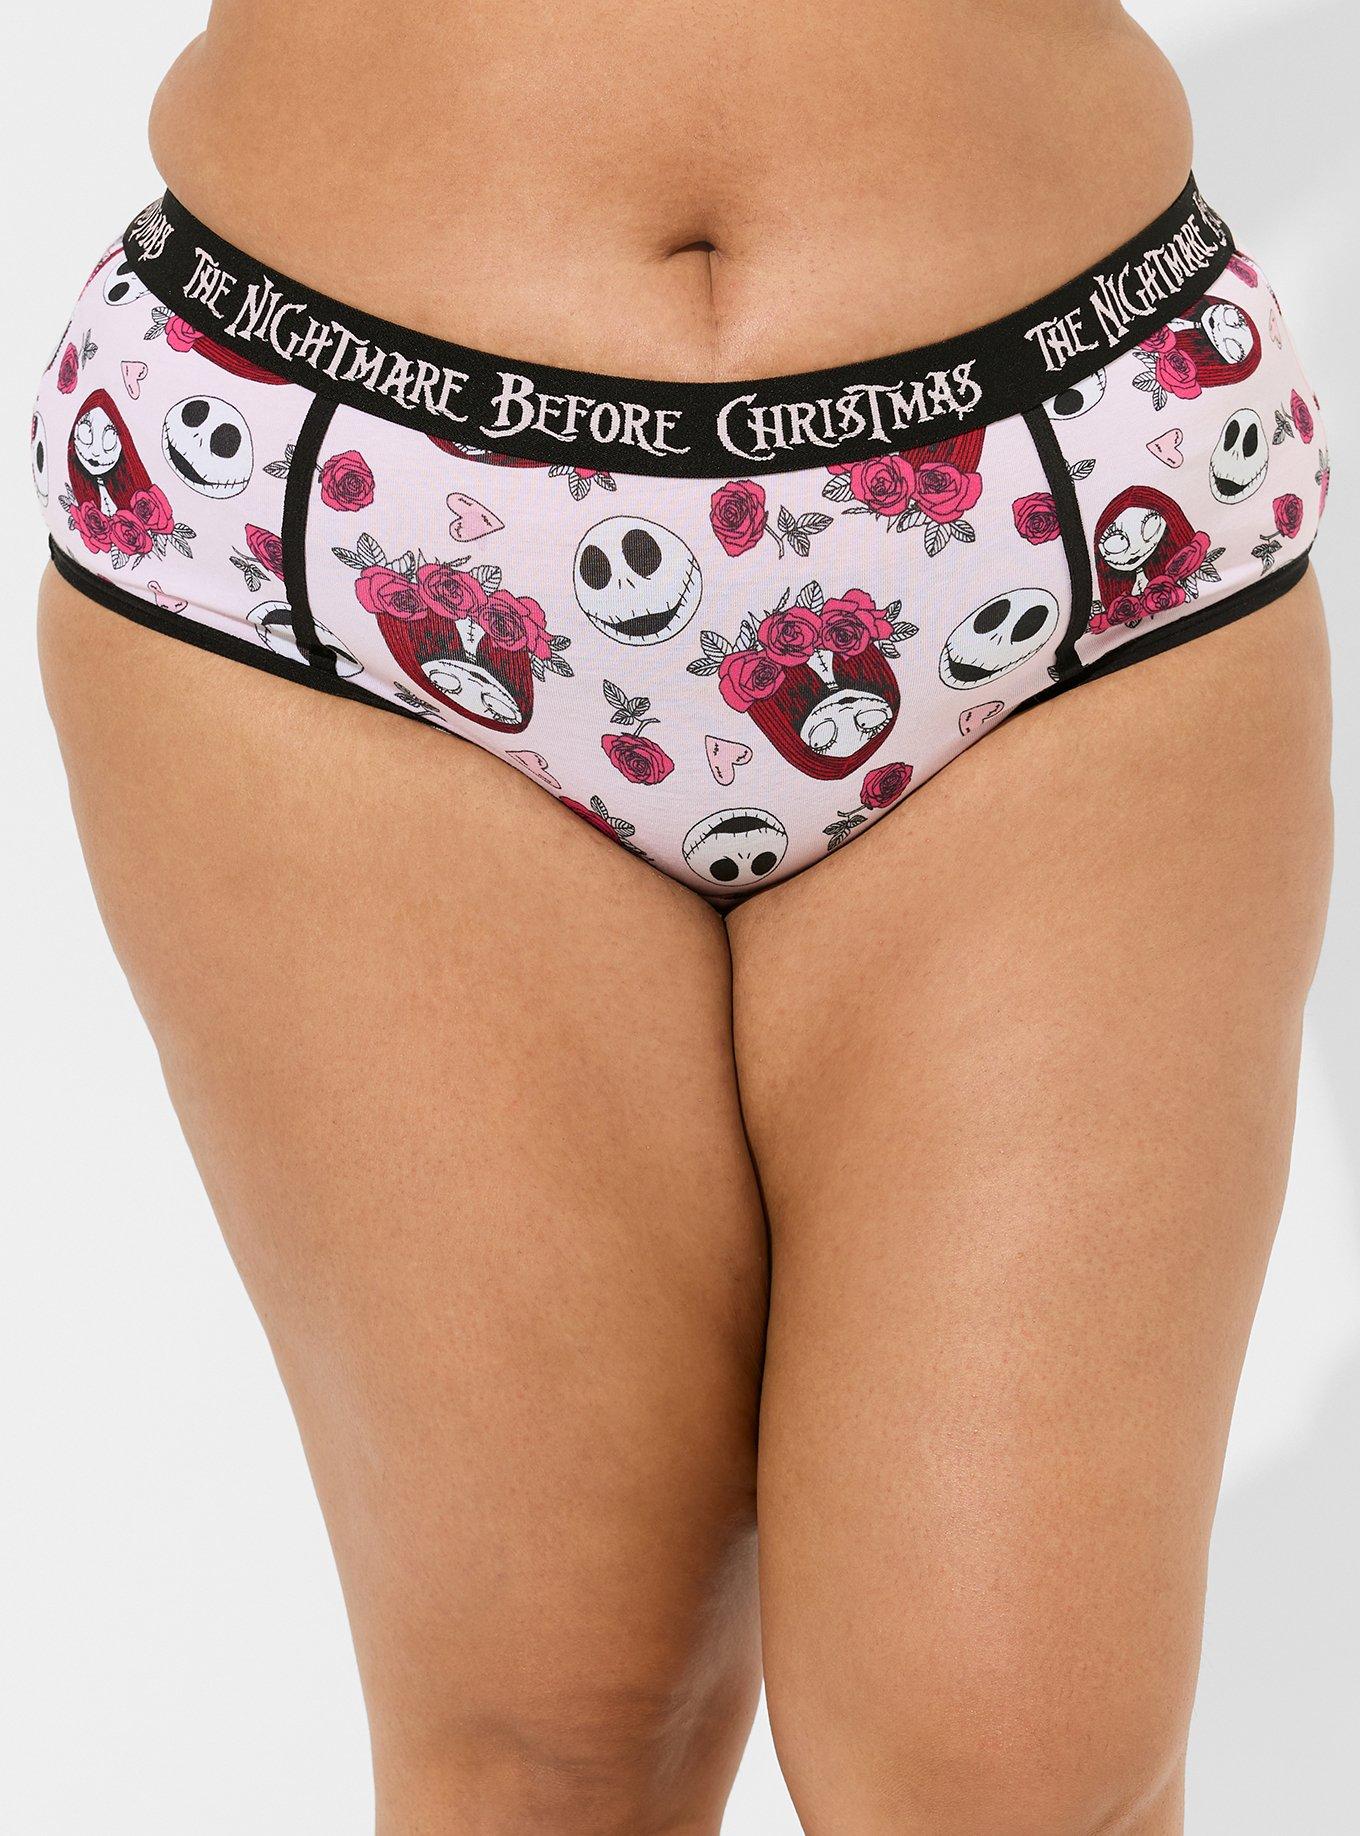 Torrid - Cheeky Panty - The Nightmare Before Christmas Purple Floral Cotton